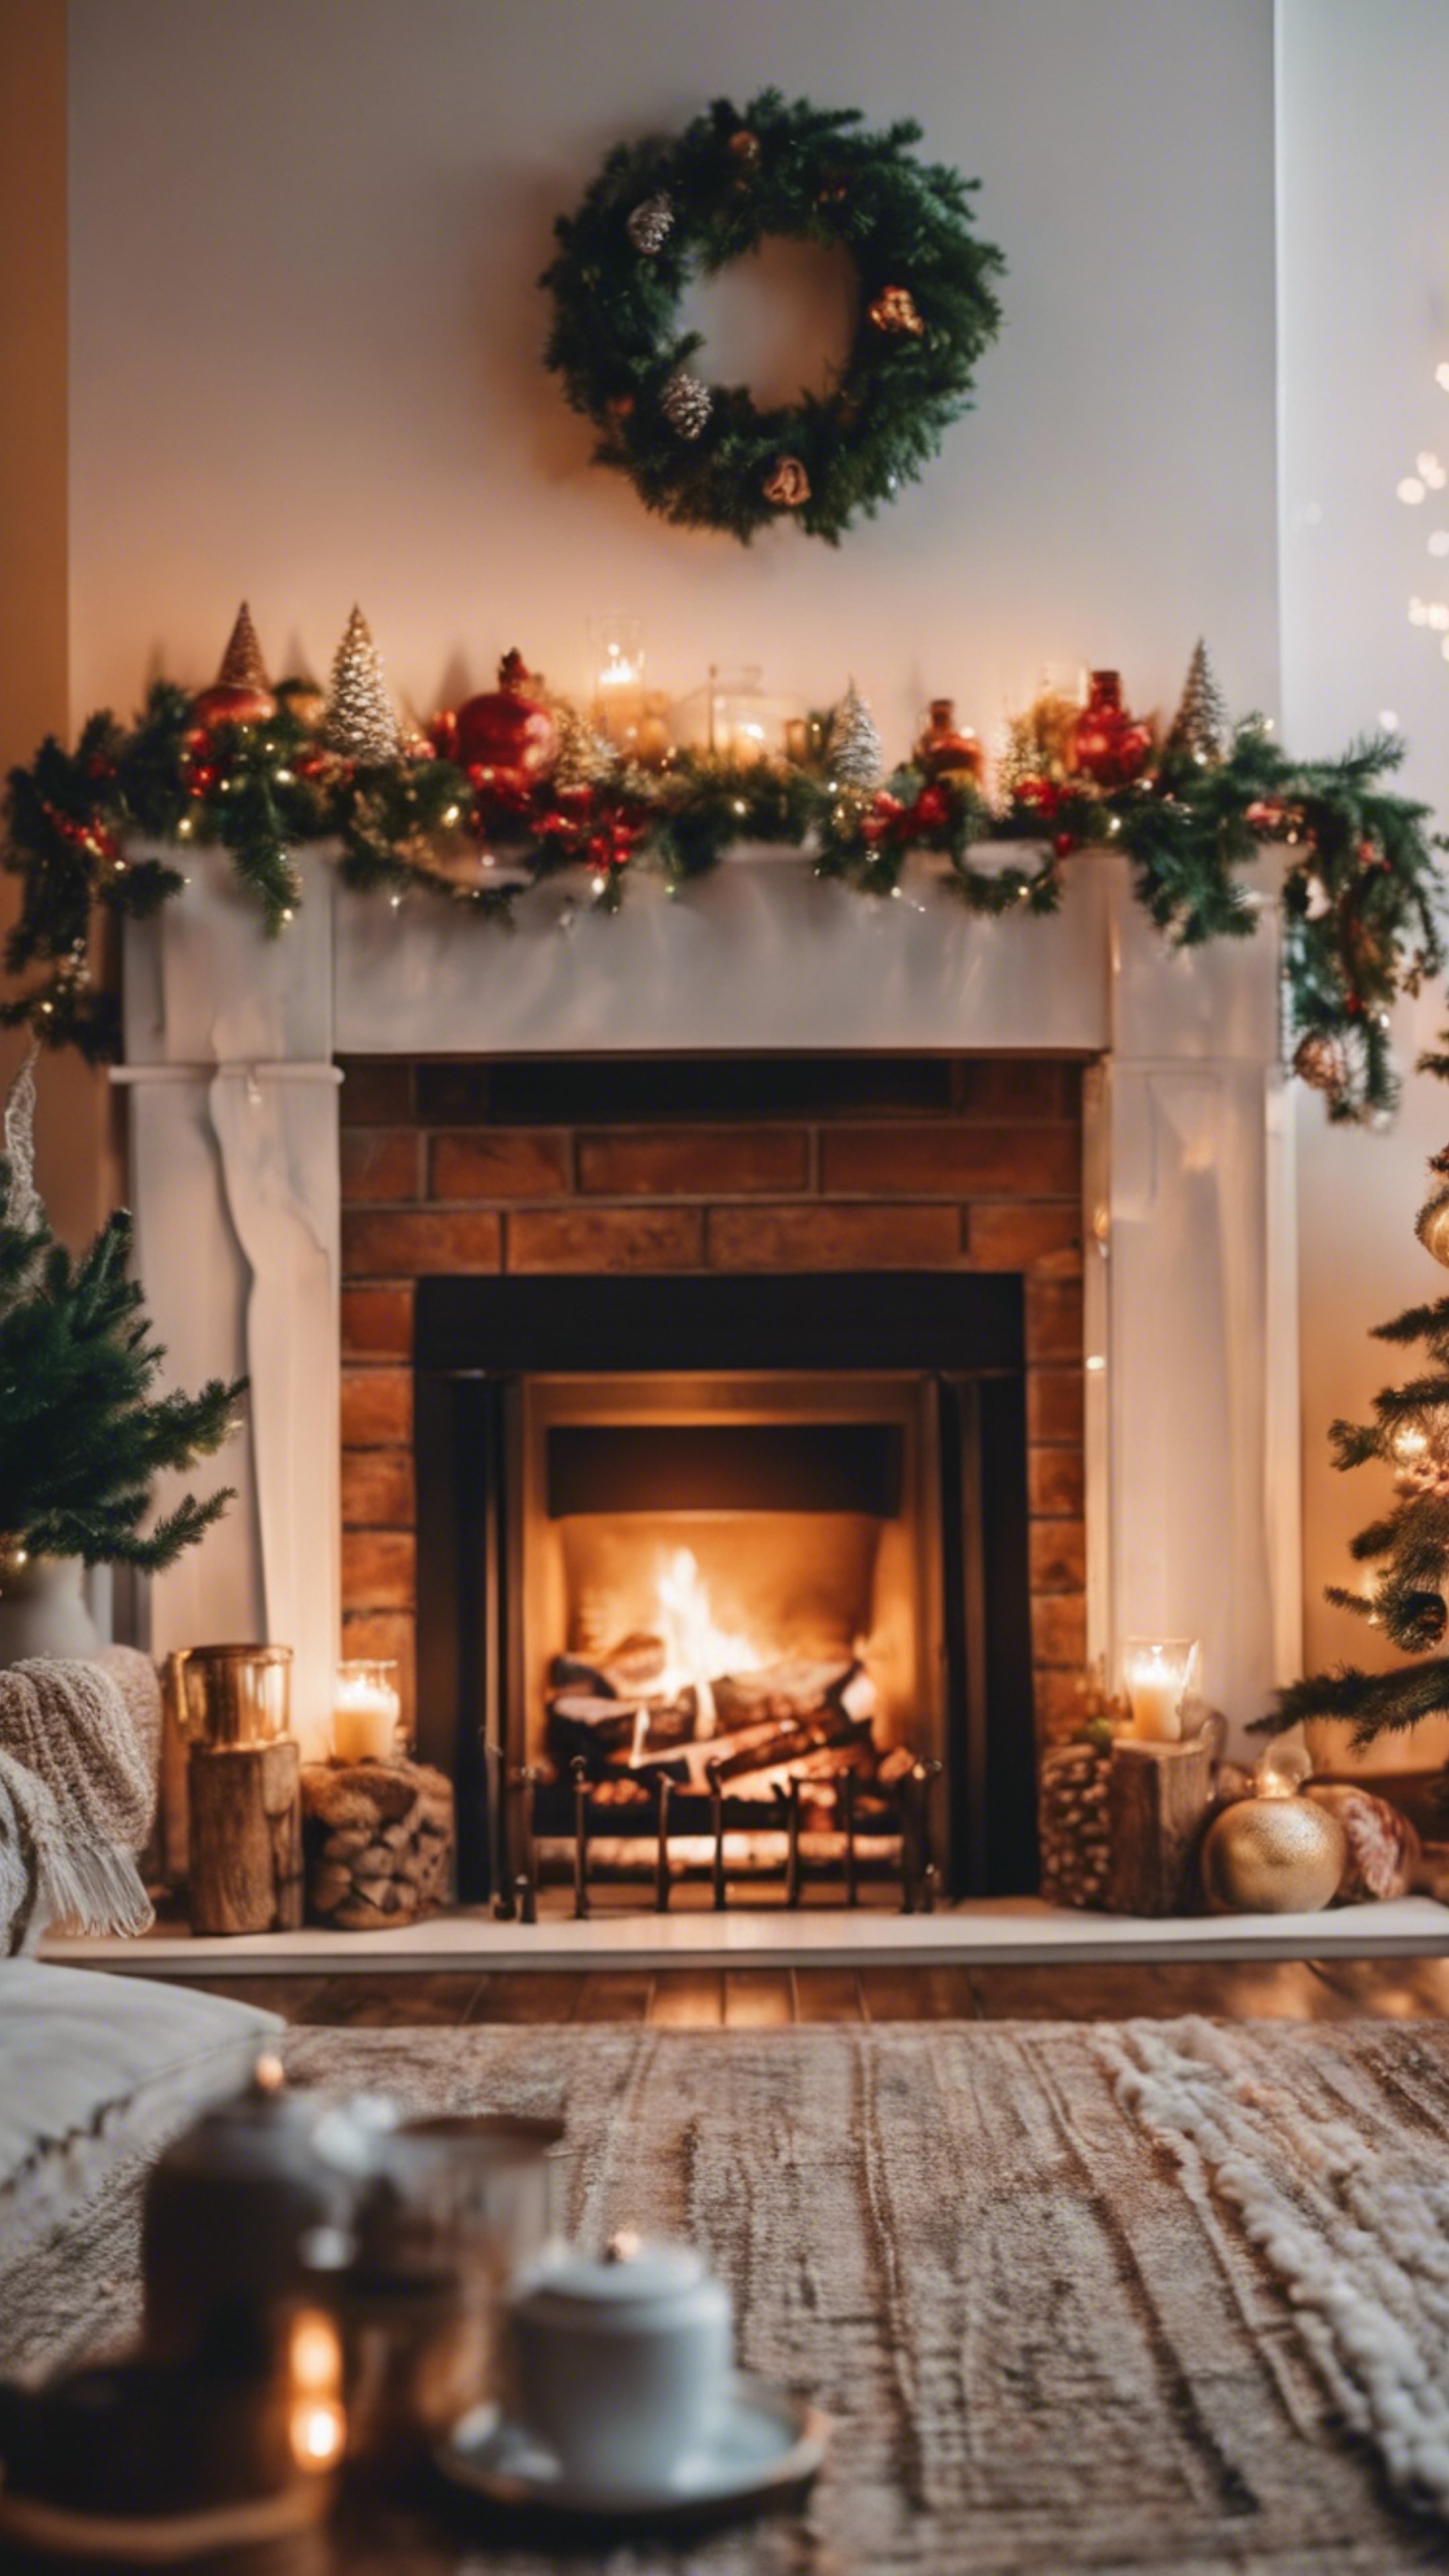 A cozy living room decorated for Christmas in boho style with a fireplace. Валлпапер[2870ecc061ac4c6491a9]